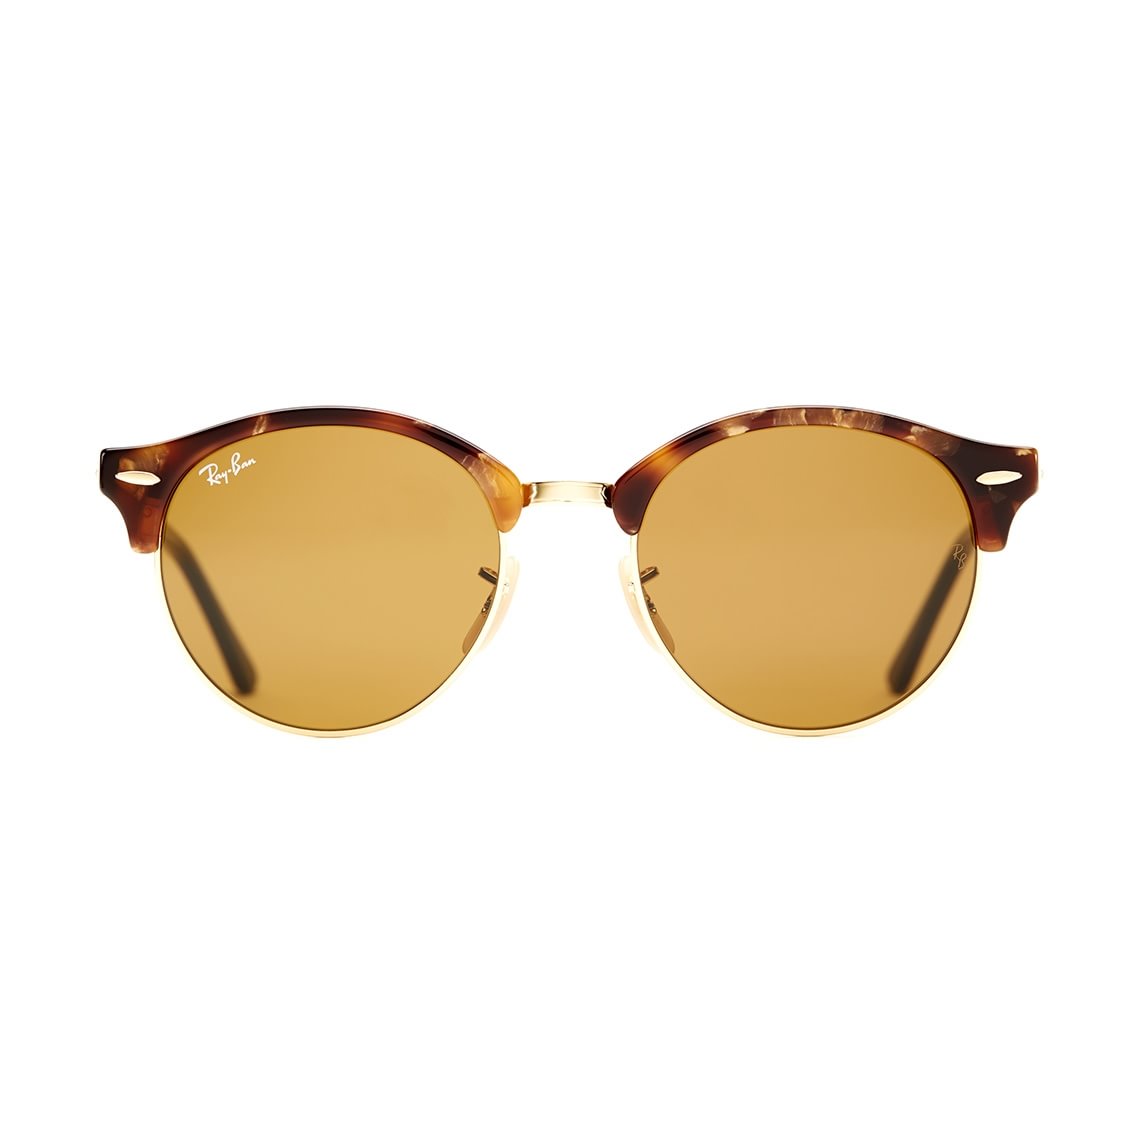 Ray-Ban Clubround RB4246 1160 51